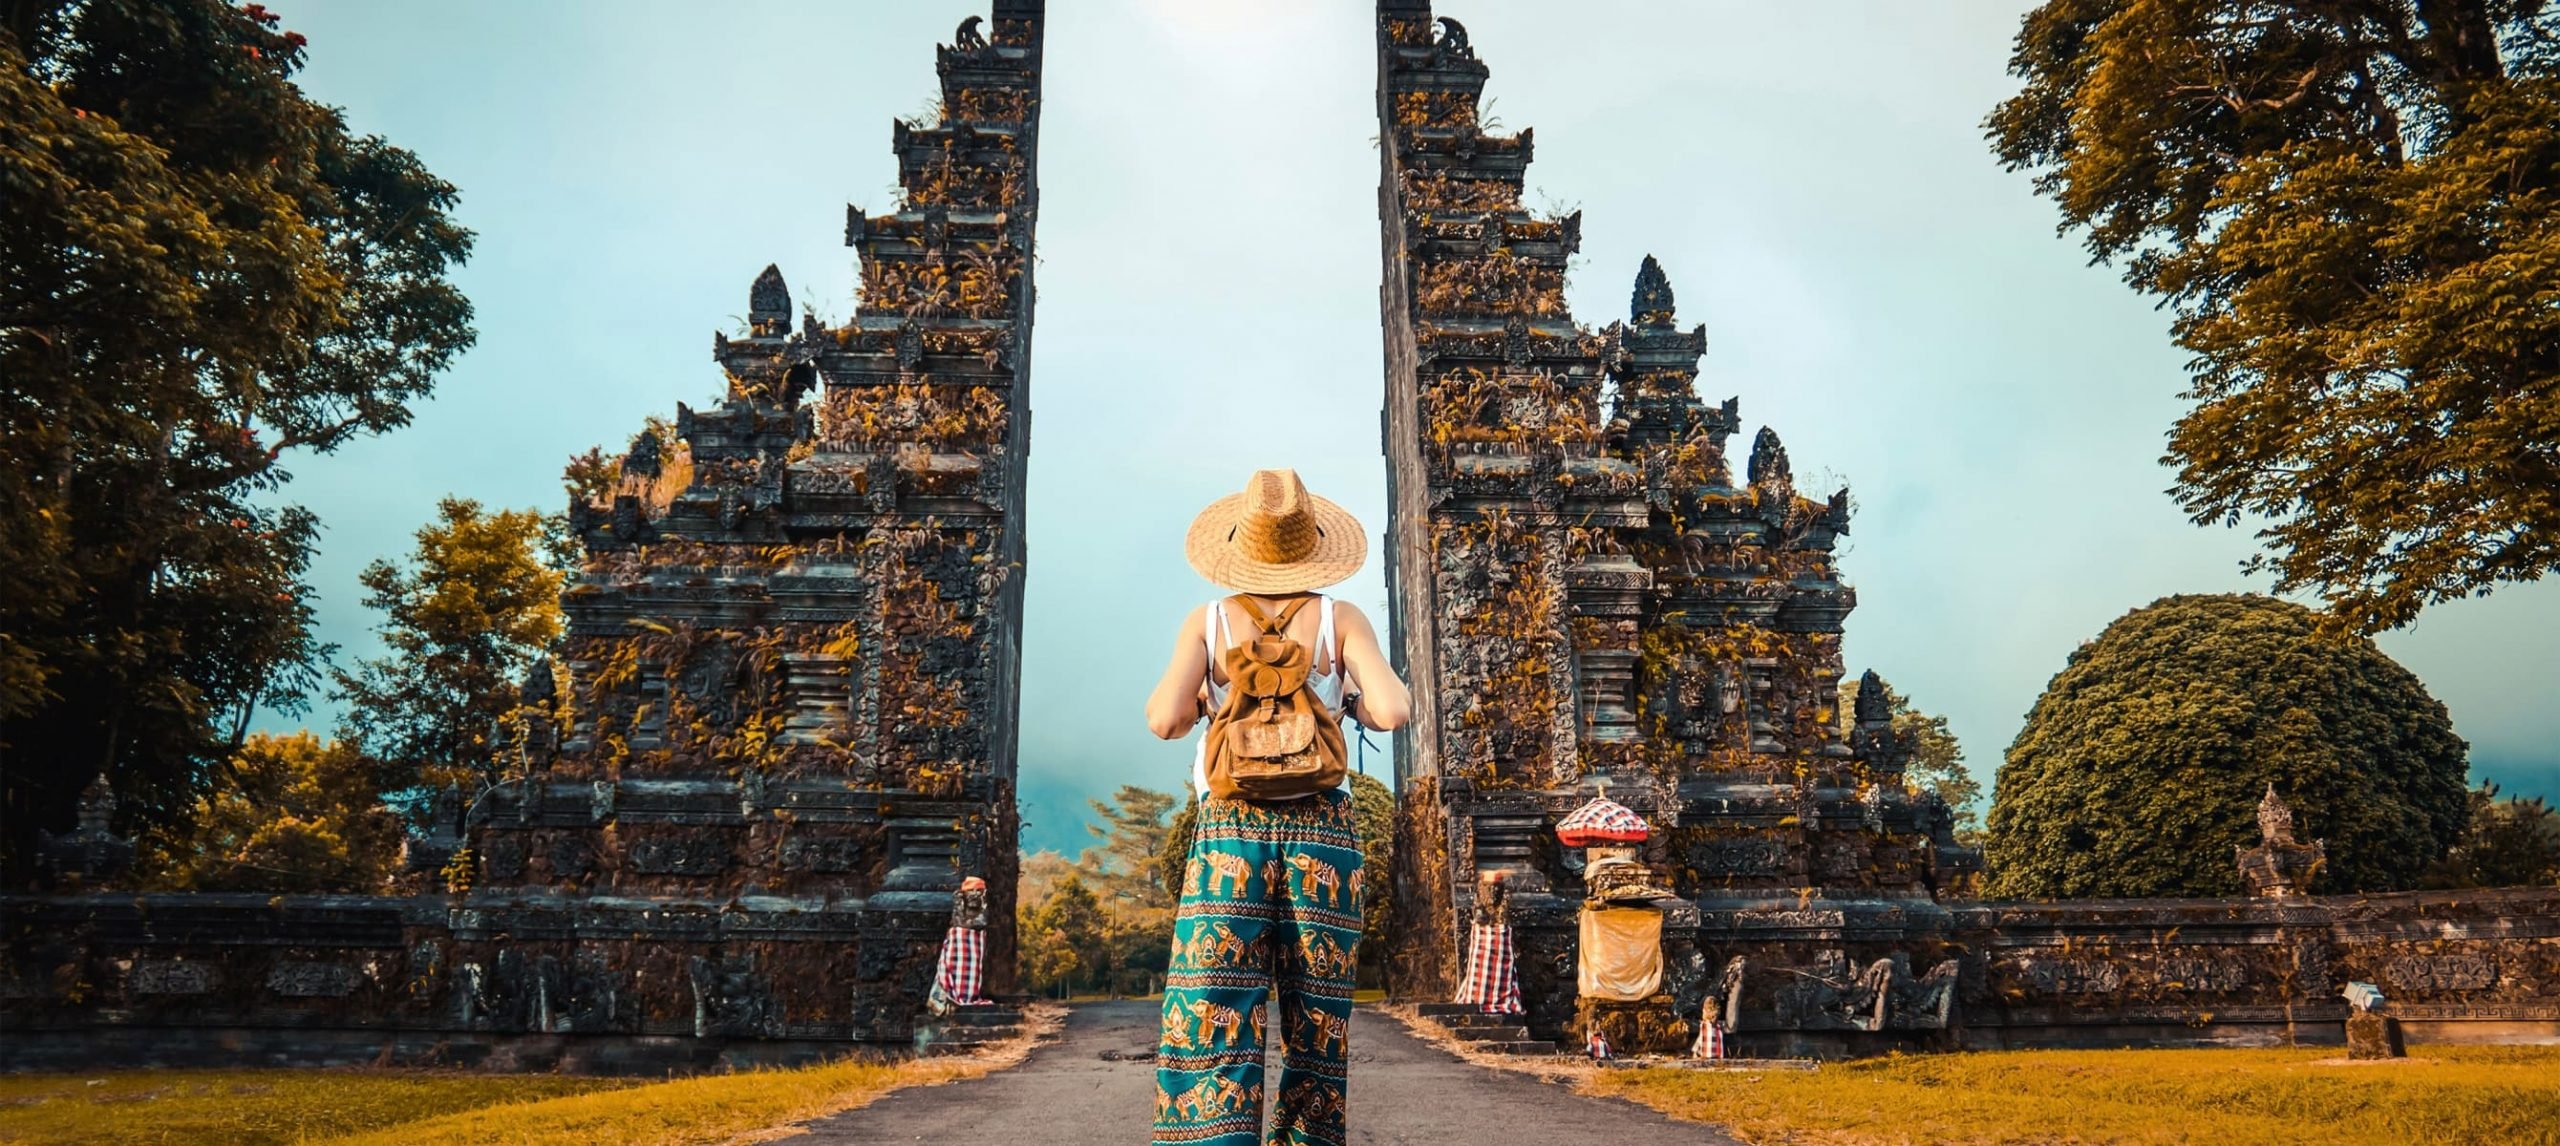 Ultimate Guide: Best Things to Do in Bali, Indonesia